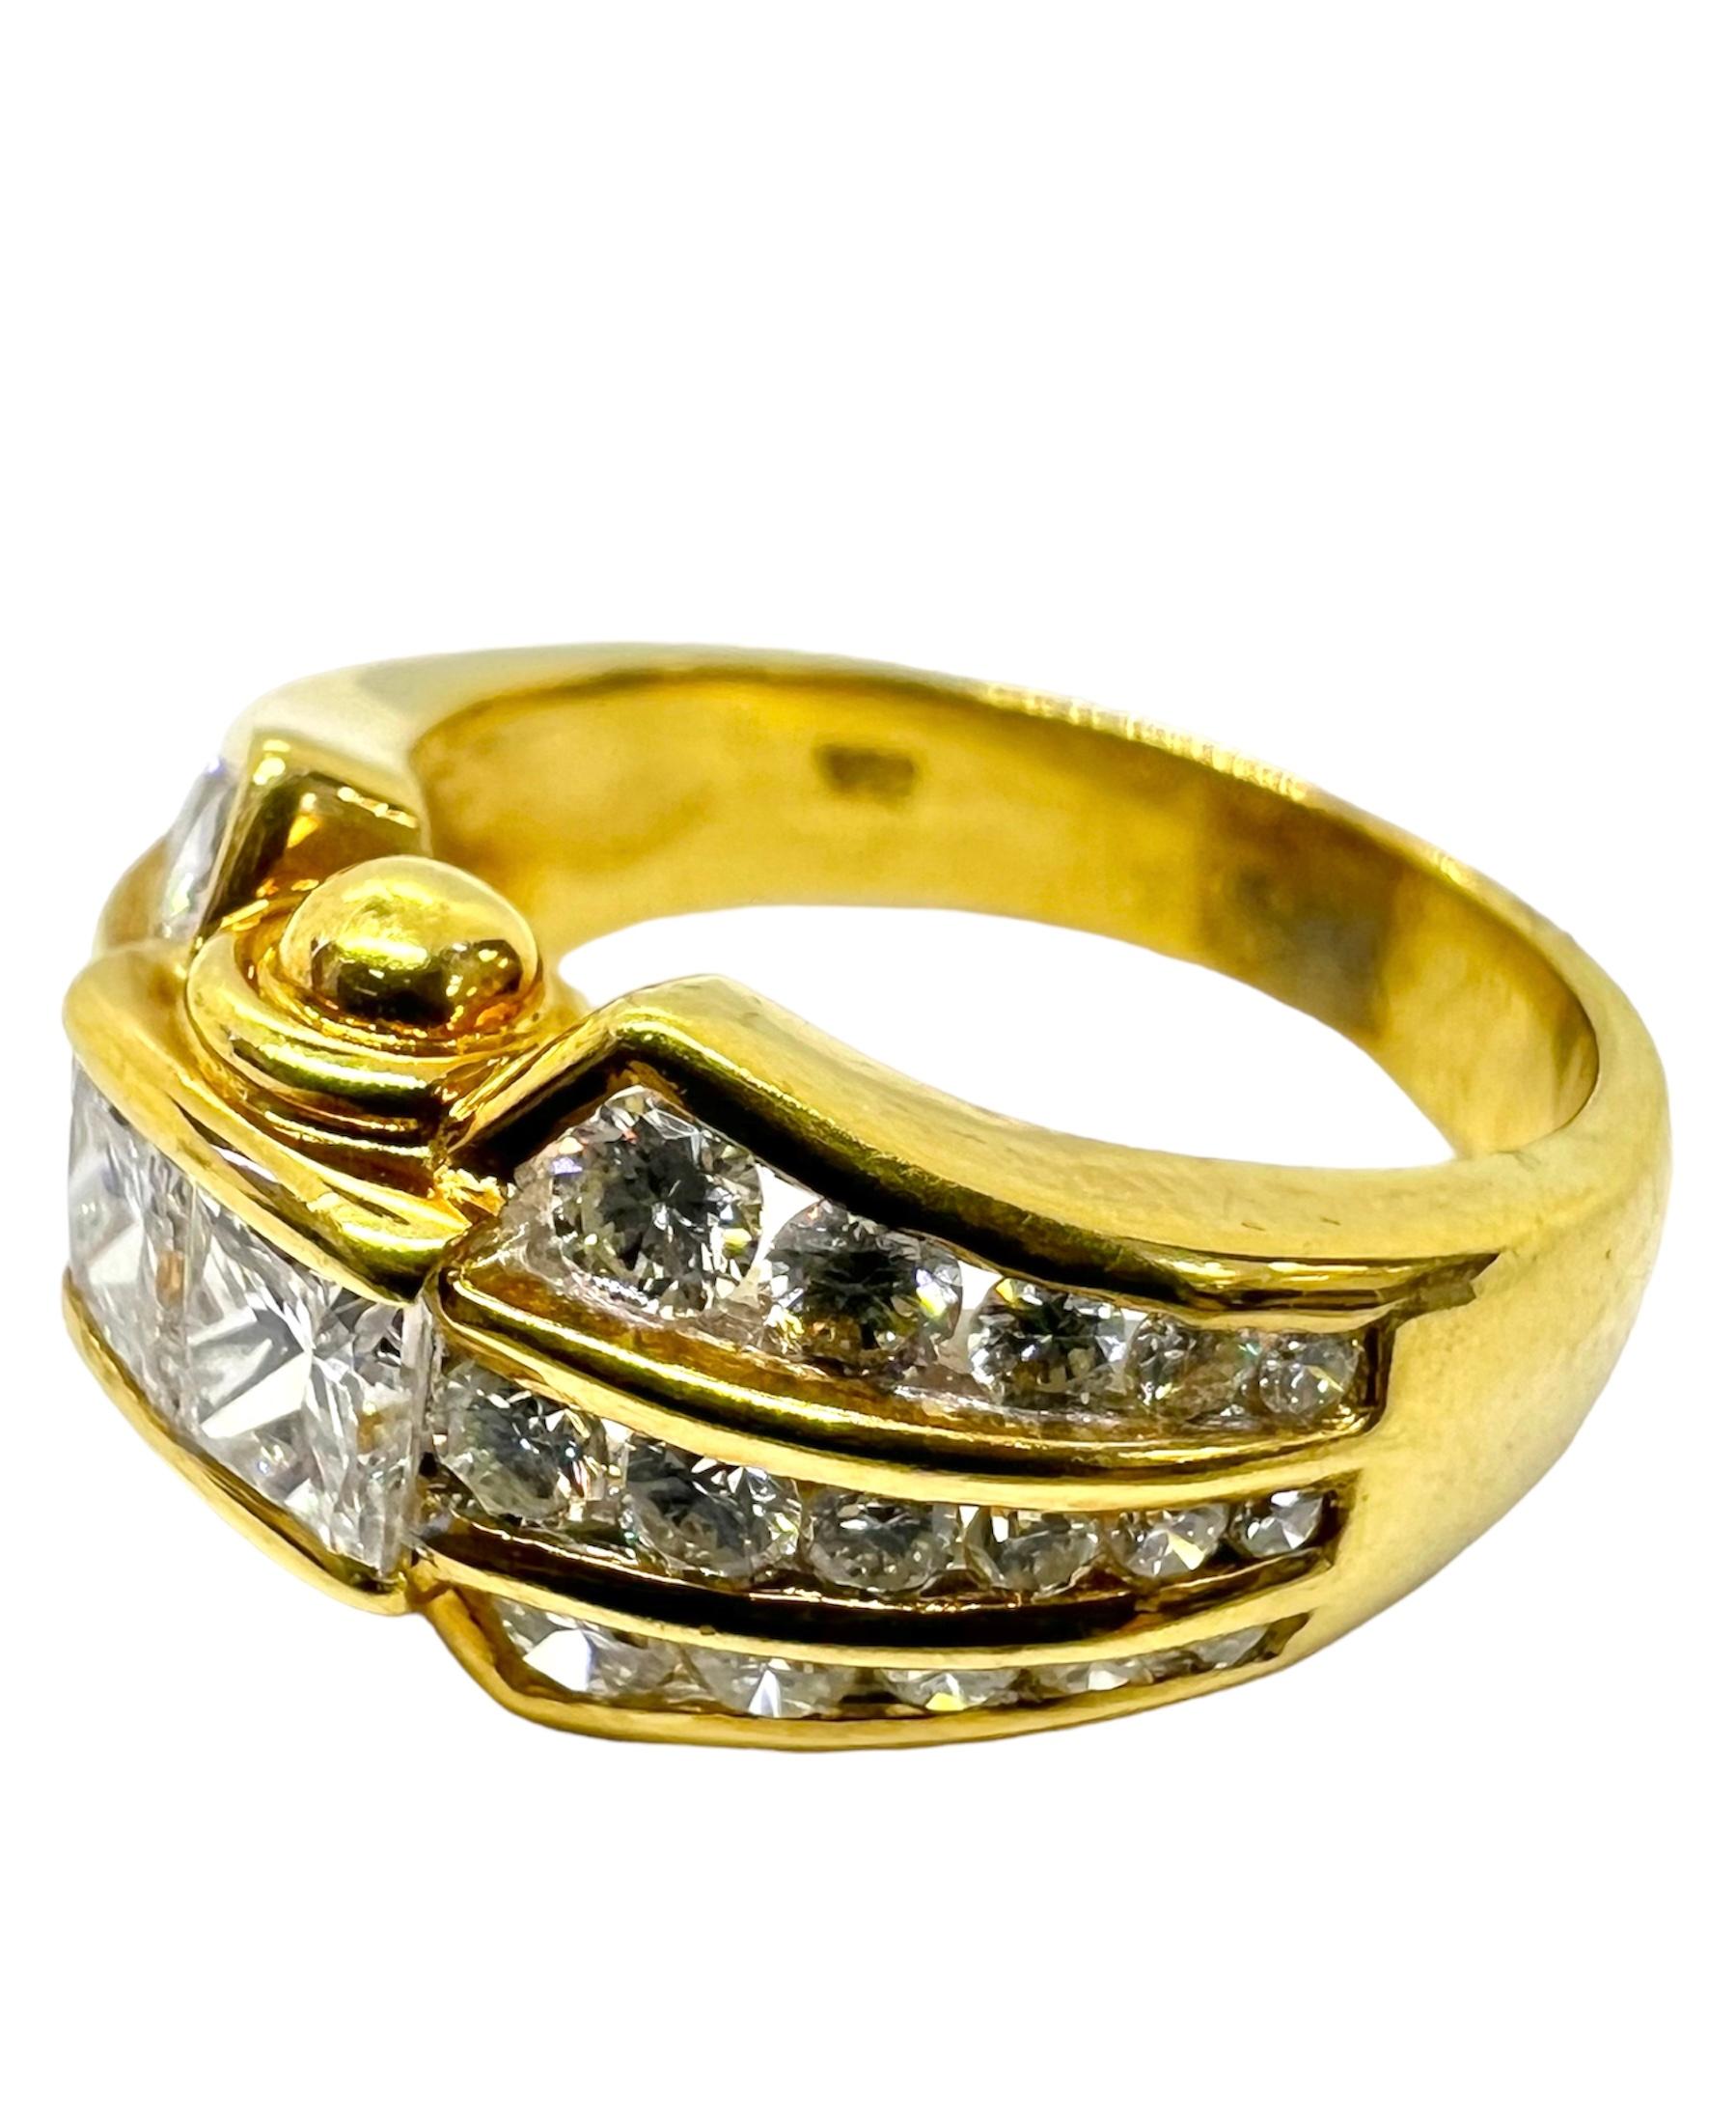 18K yellow gold ring with round diamonds and square cut diamonds.

Sophia D by Joseph Dardashti LTD has been known worldwide for 35 years and are inspired by classic Art Deco design that merges with modern manufacturing techniques.  